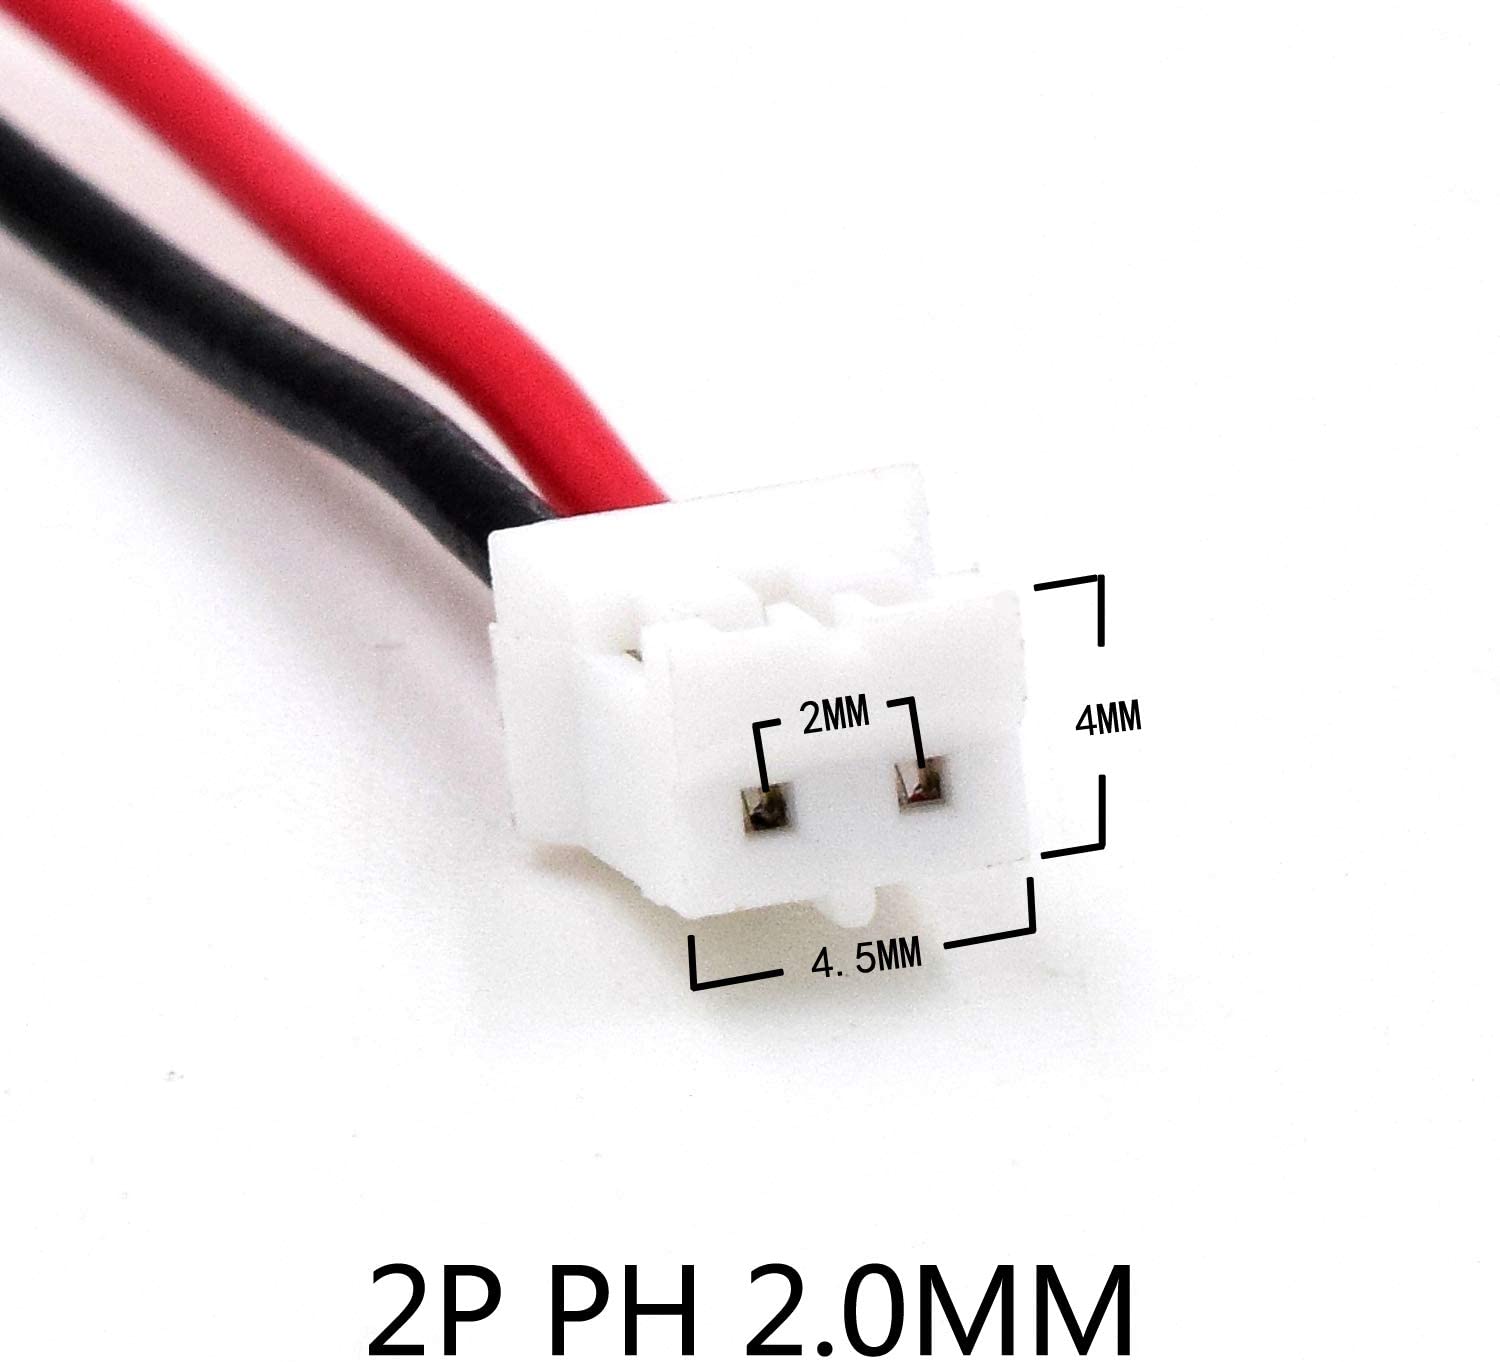 YDL 3.7V 2400mAh 436480 Rechargeable Polymer Lithium-Ion Battery Length 82mm